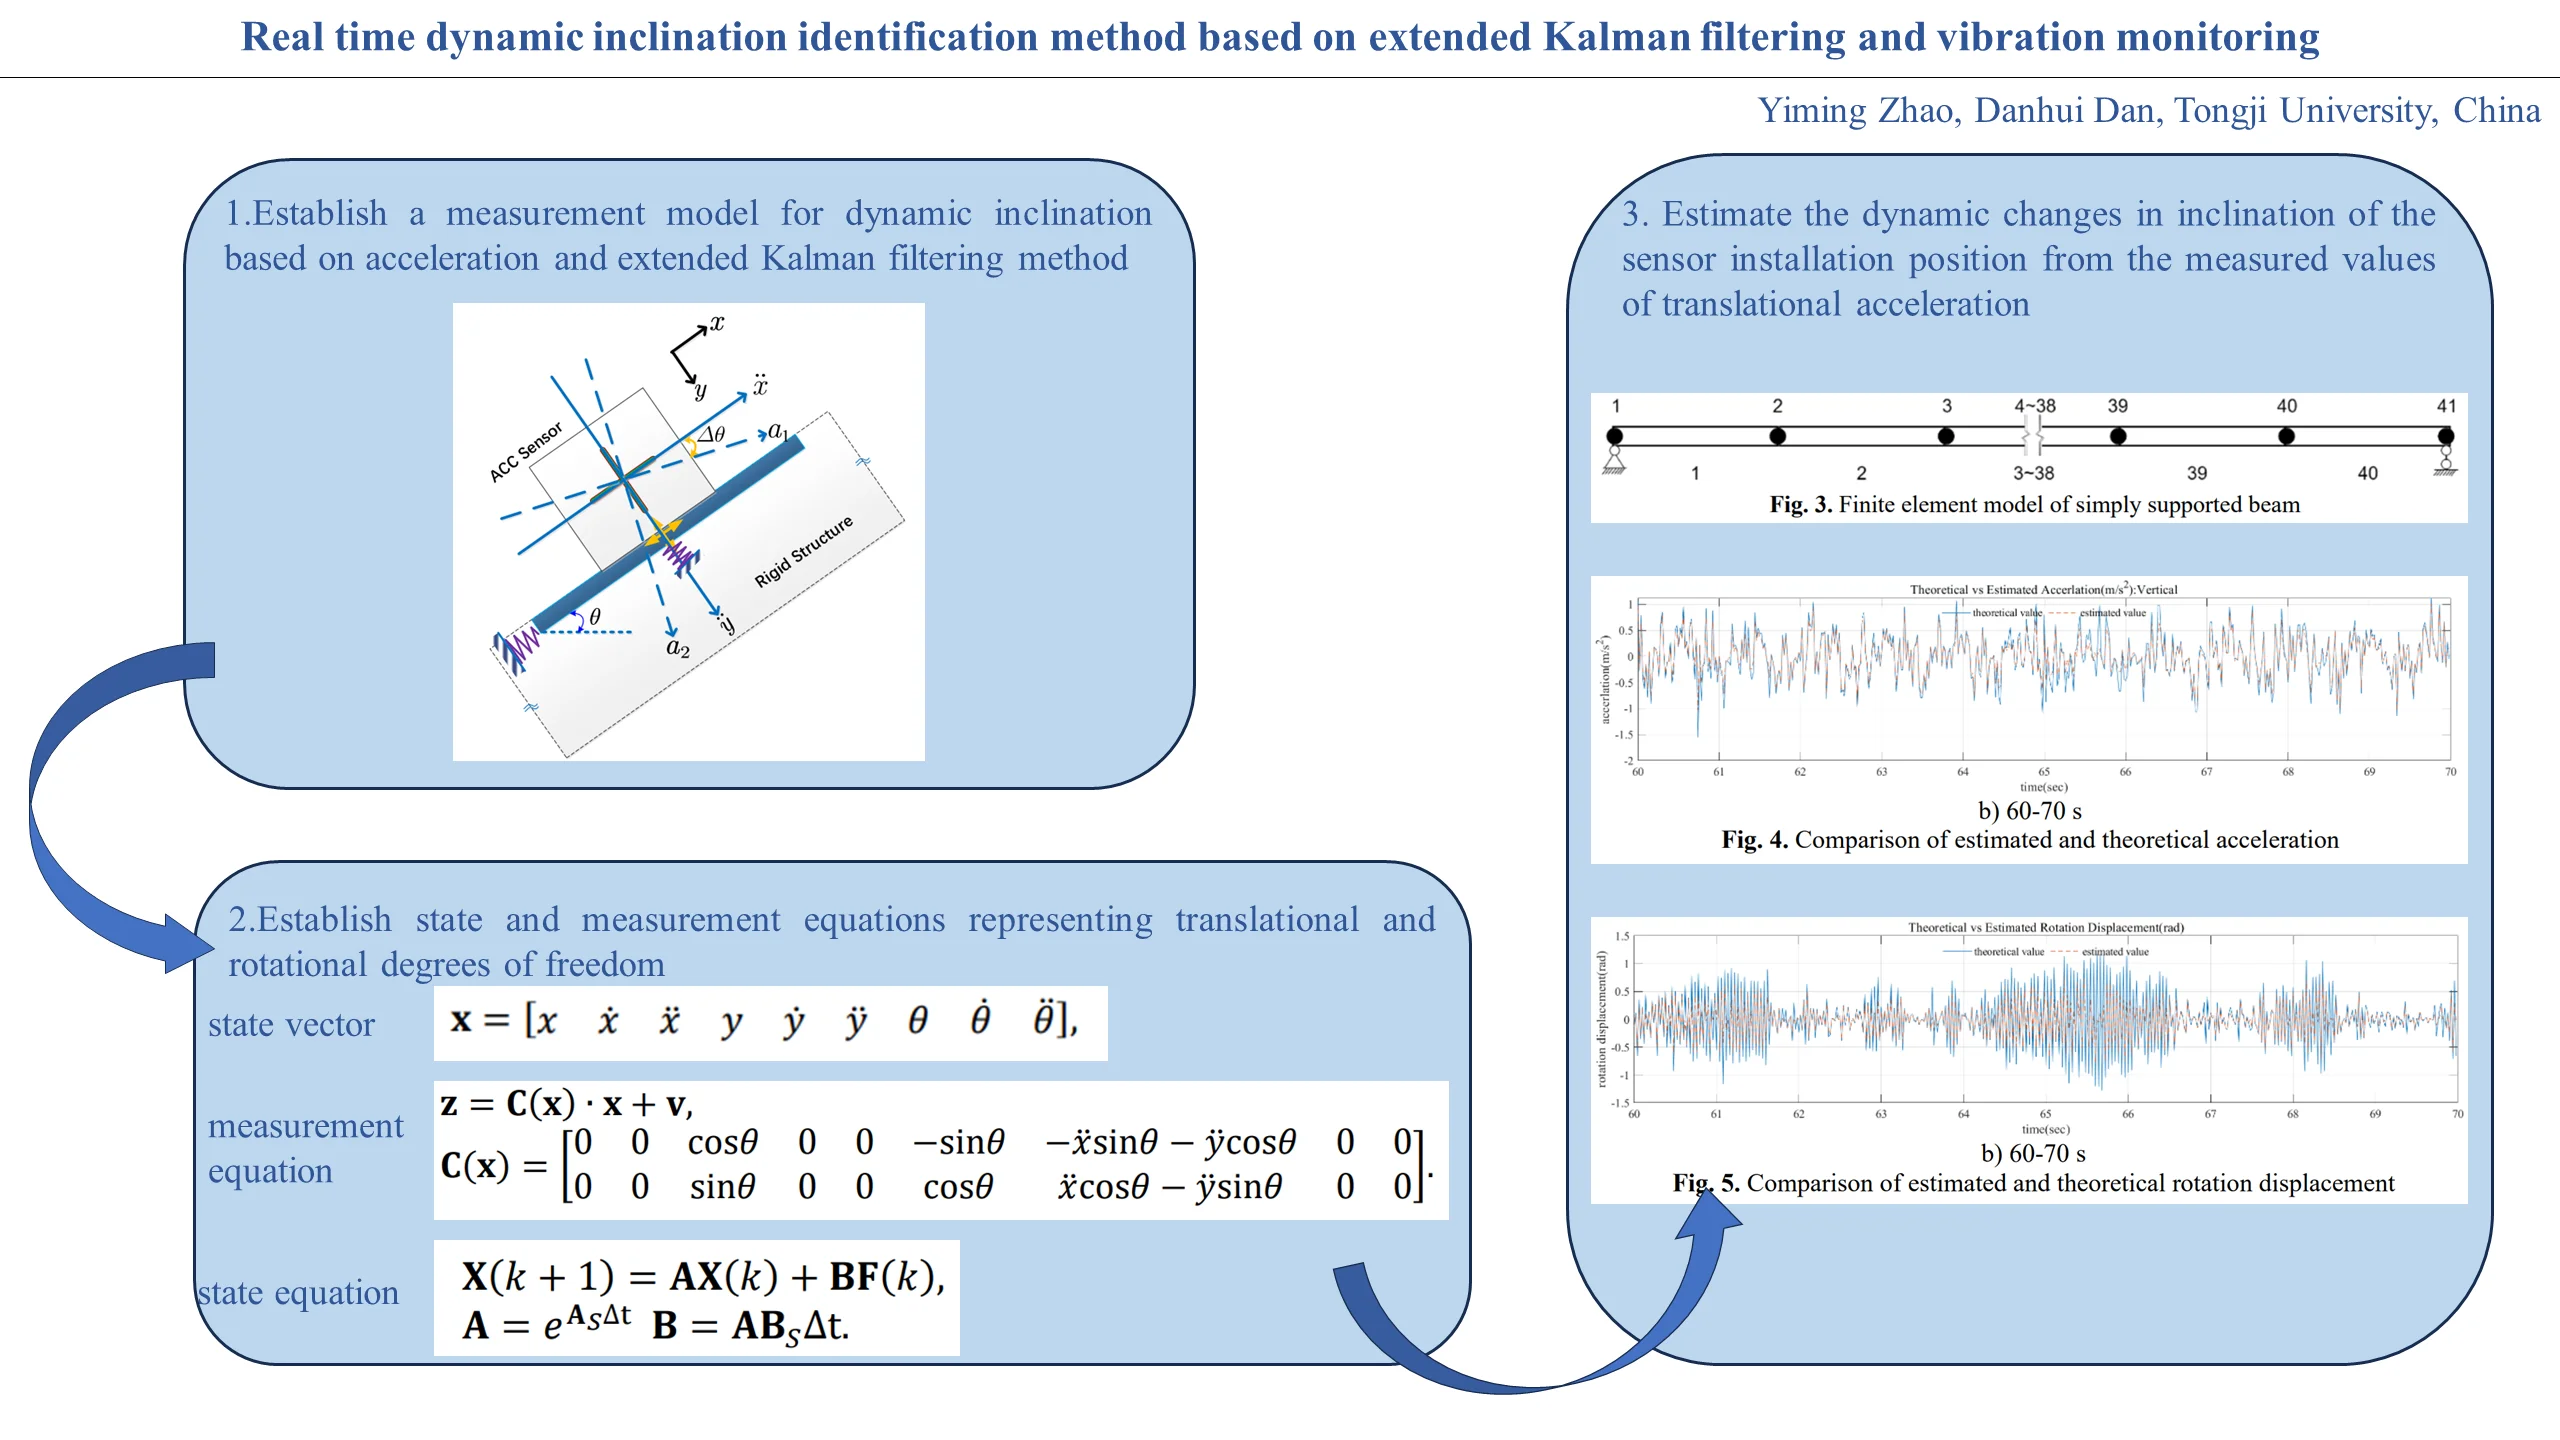 Real time dynamic inclination identification method based on extended Kalman filtering and vibration monitoring